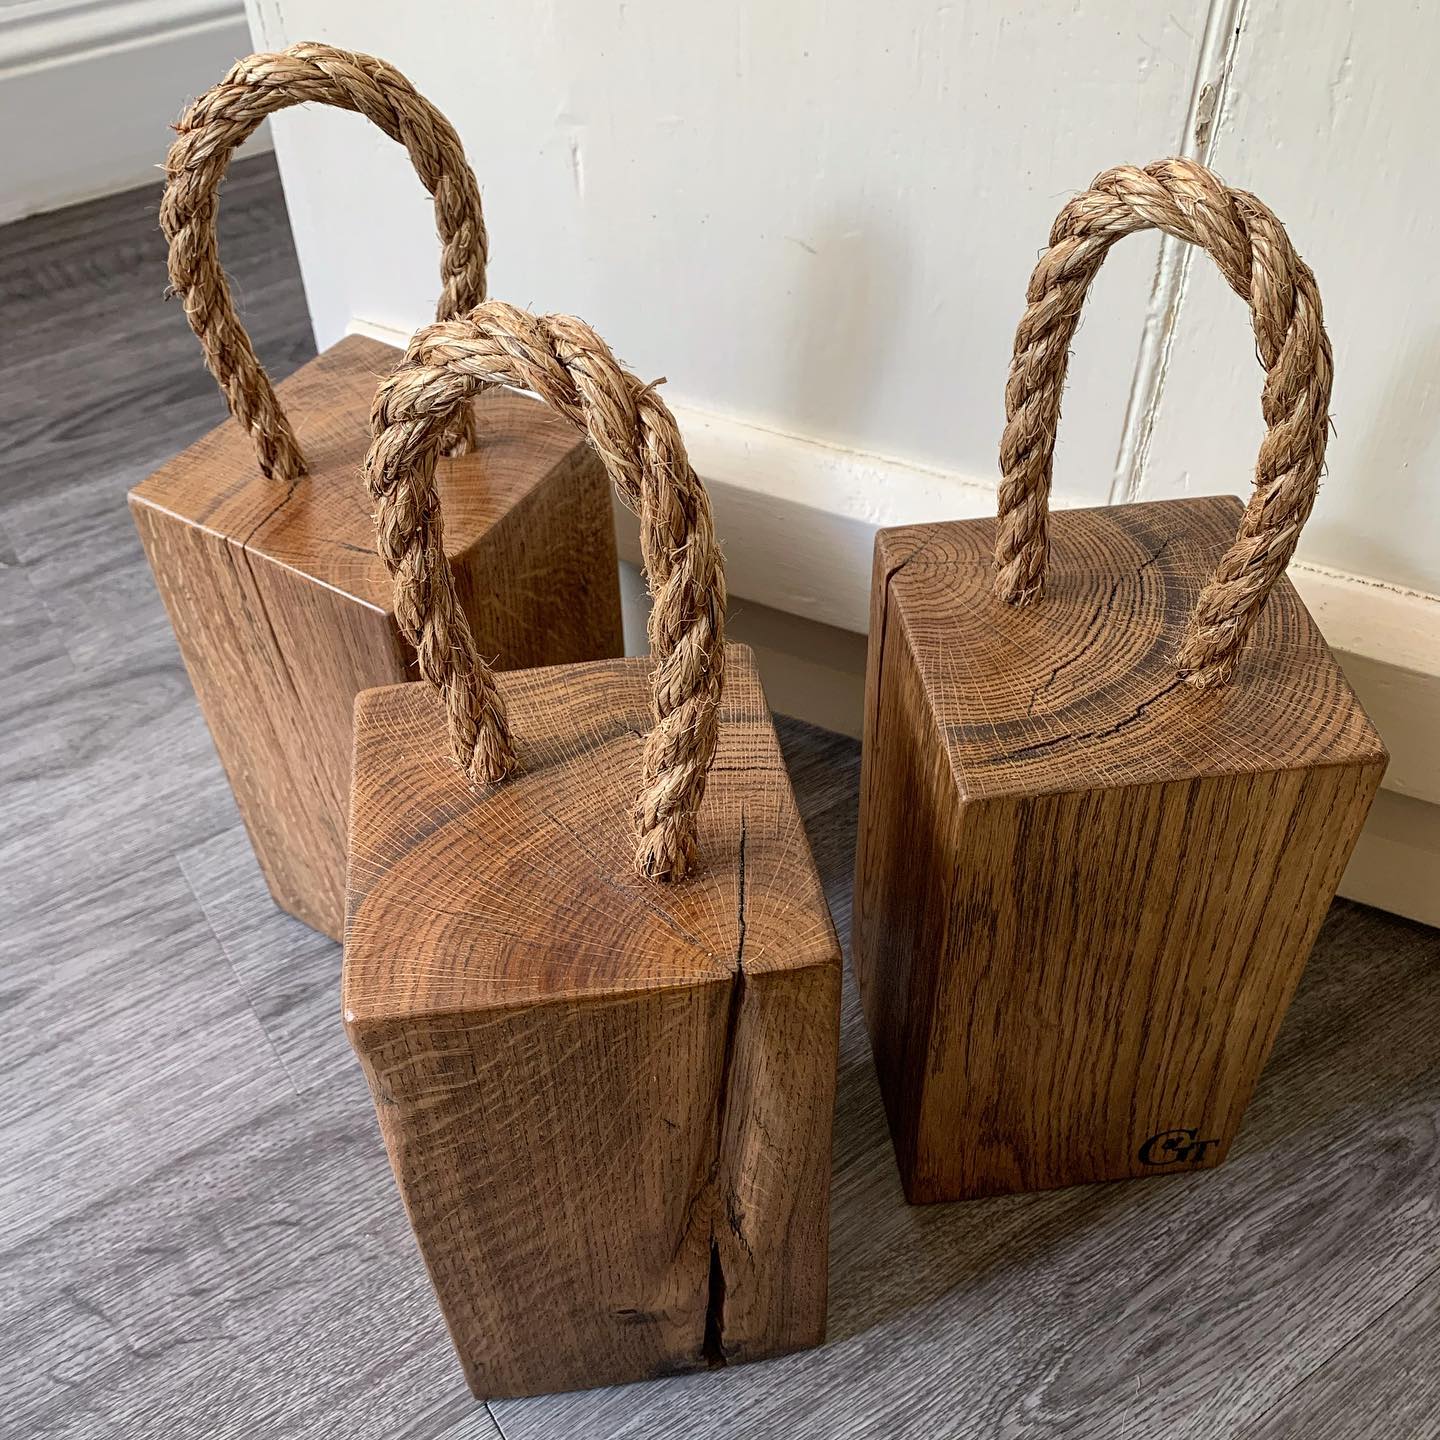 We have just created a new product on our website 🏻.Each one of these doorstops is unique, made from some of our most characterful pieces of oak. ..All options can be found at www.gingerandtweed.com or by following the product link. ...#character #naturalmaterials #oak #beautifulwood #rustic #doorstop #newproduct #unique #handcrafted #homewares #gingerandtweed